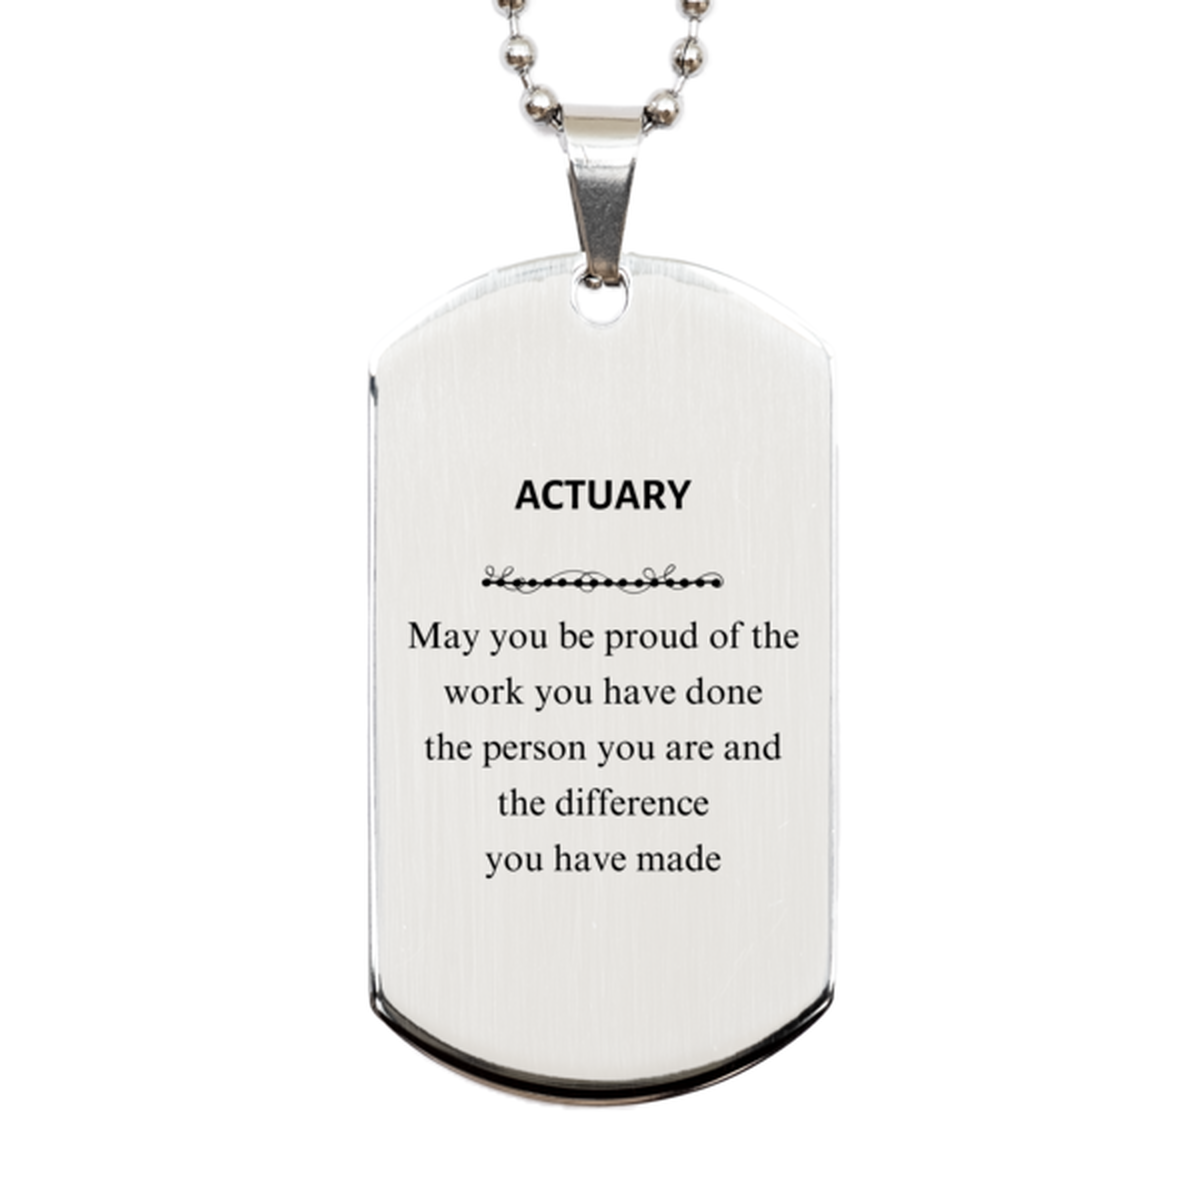 Actuary May you be proud of the work you have done, Retirement Actuary Silver Dog Tag for Colleague Appreciation Gifts Amazing for Actuary